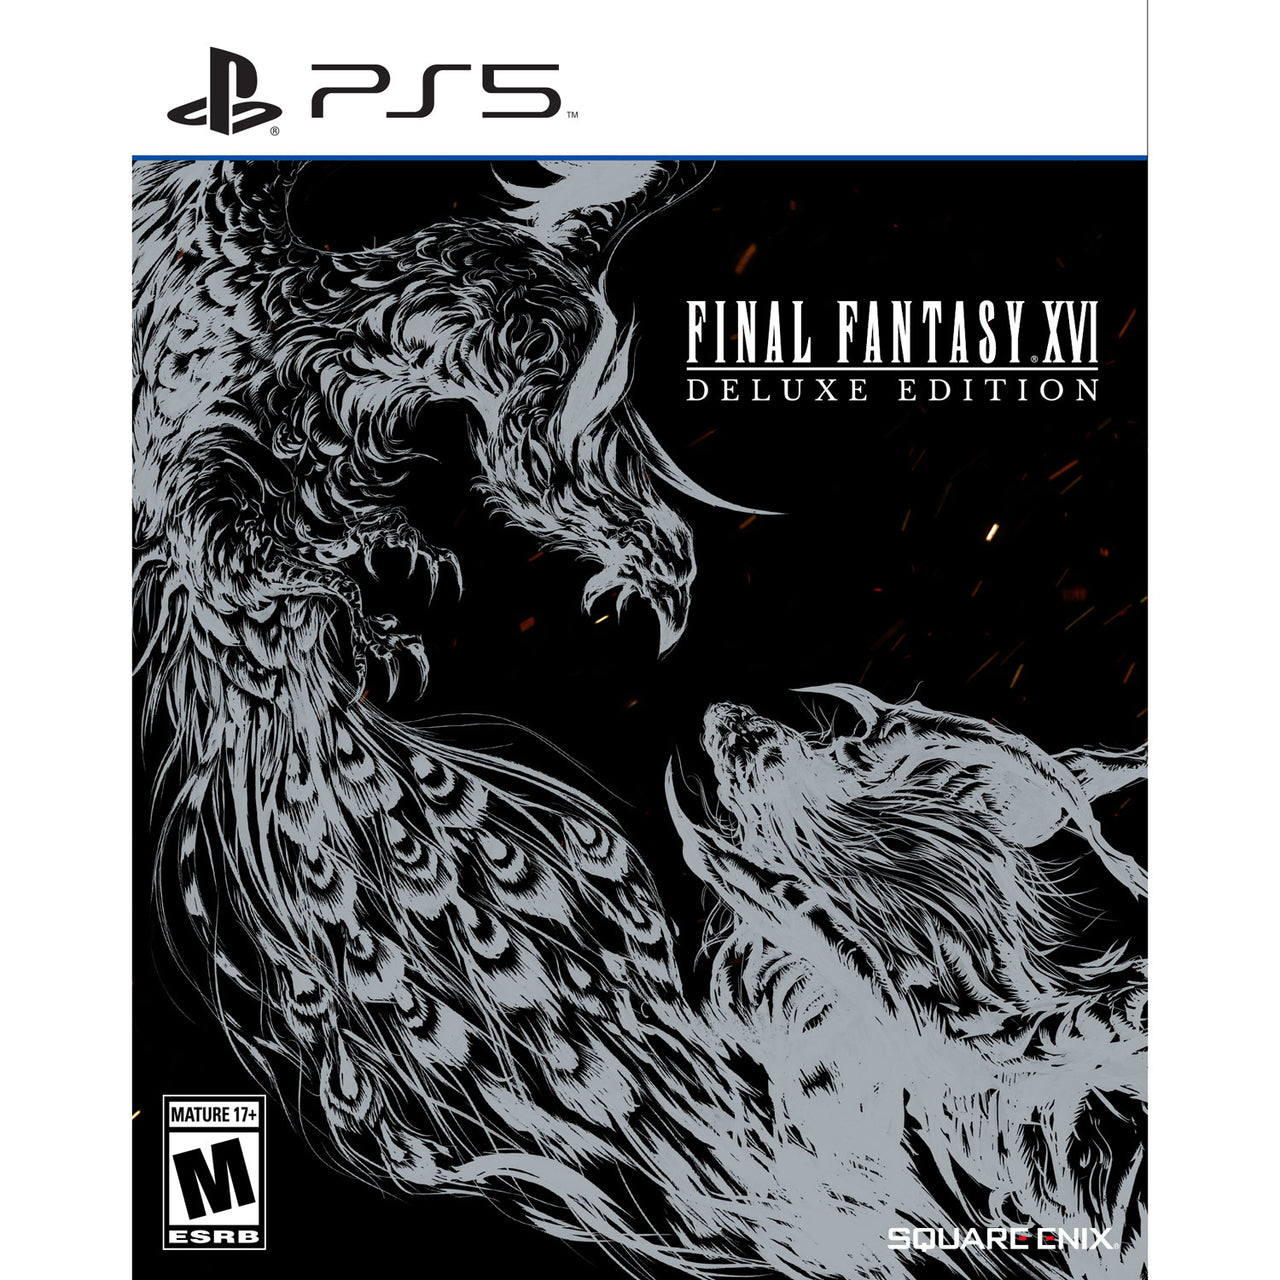 Final Fantasy XVI Deluxe Edition with SteelBook (PS5)